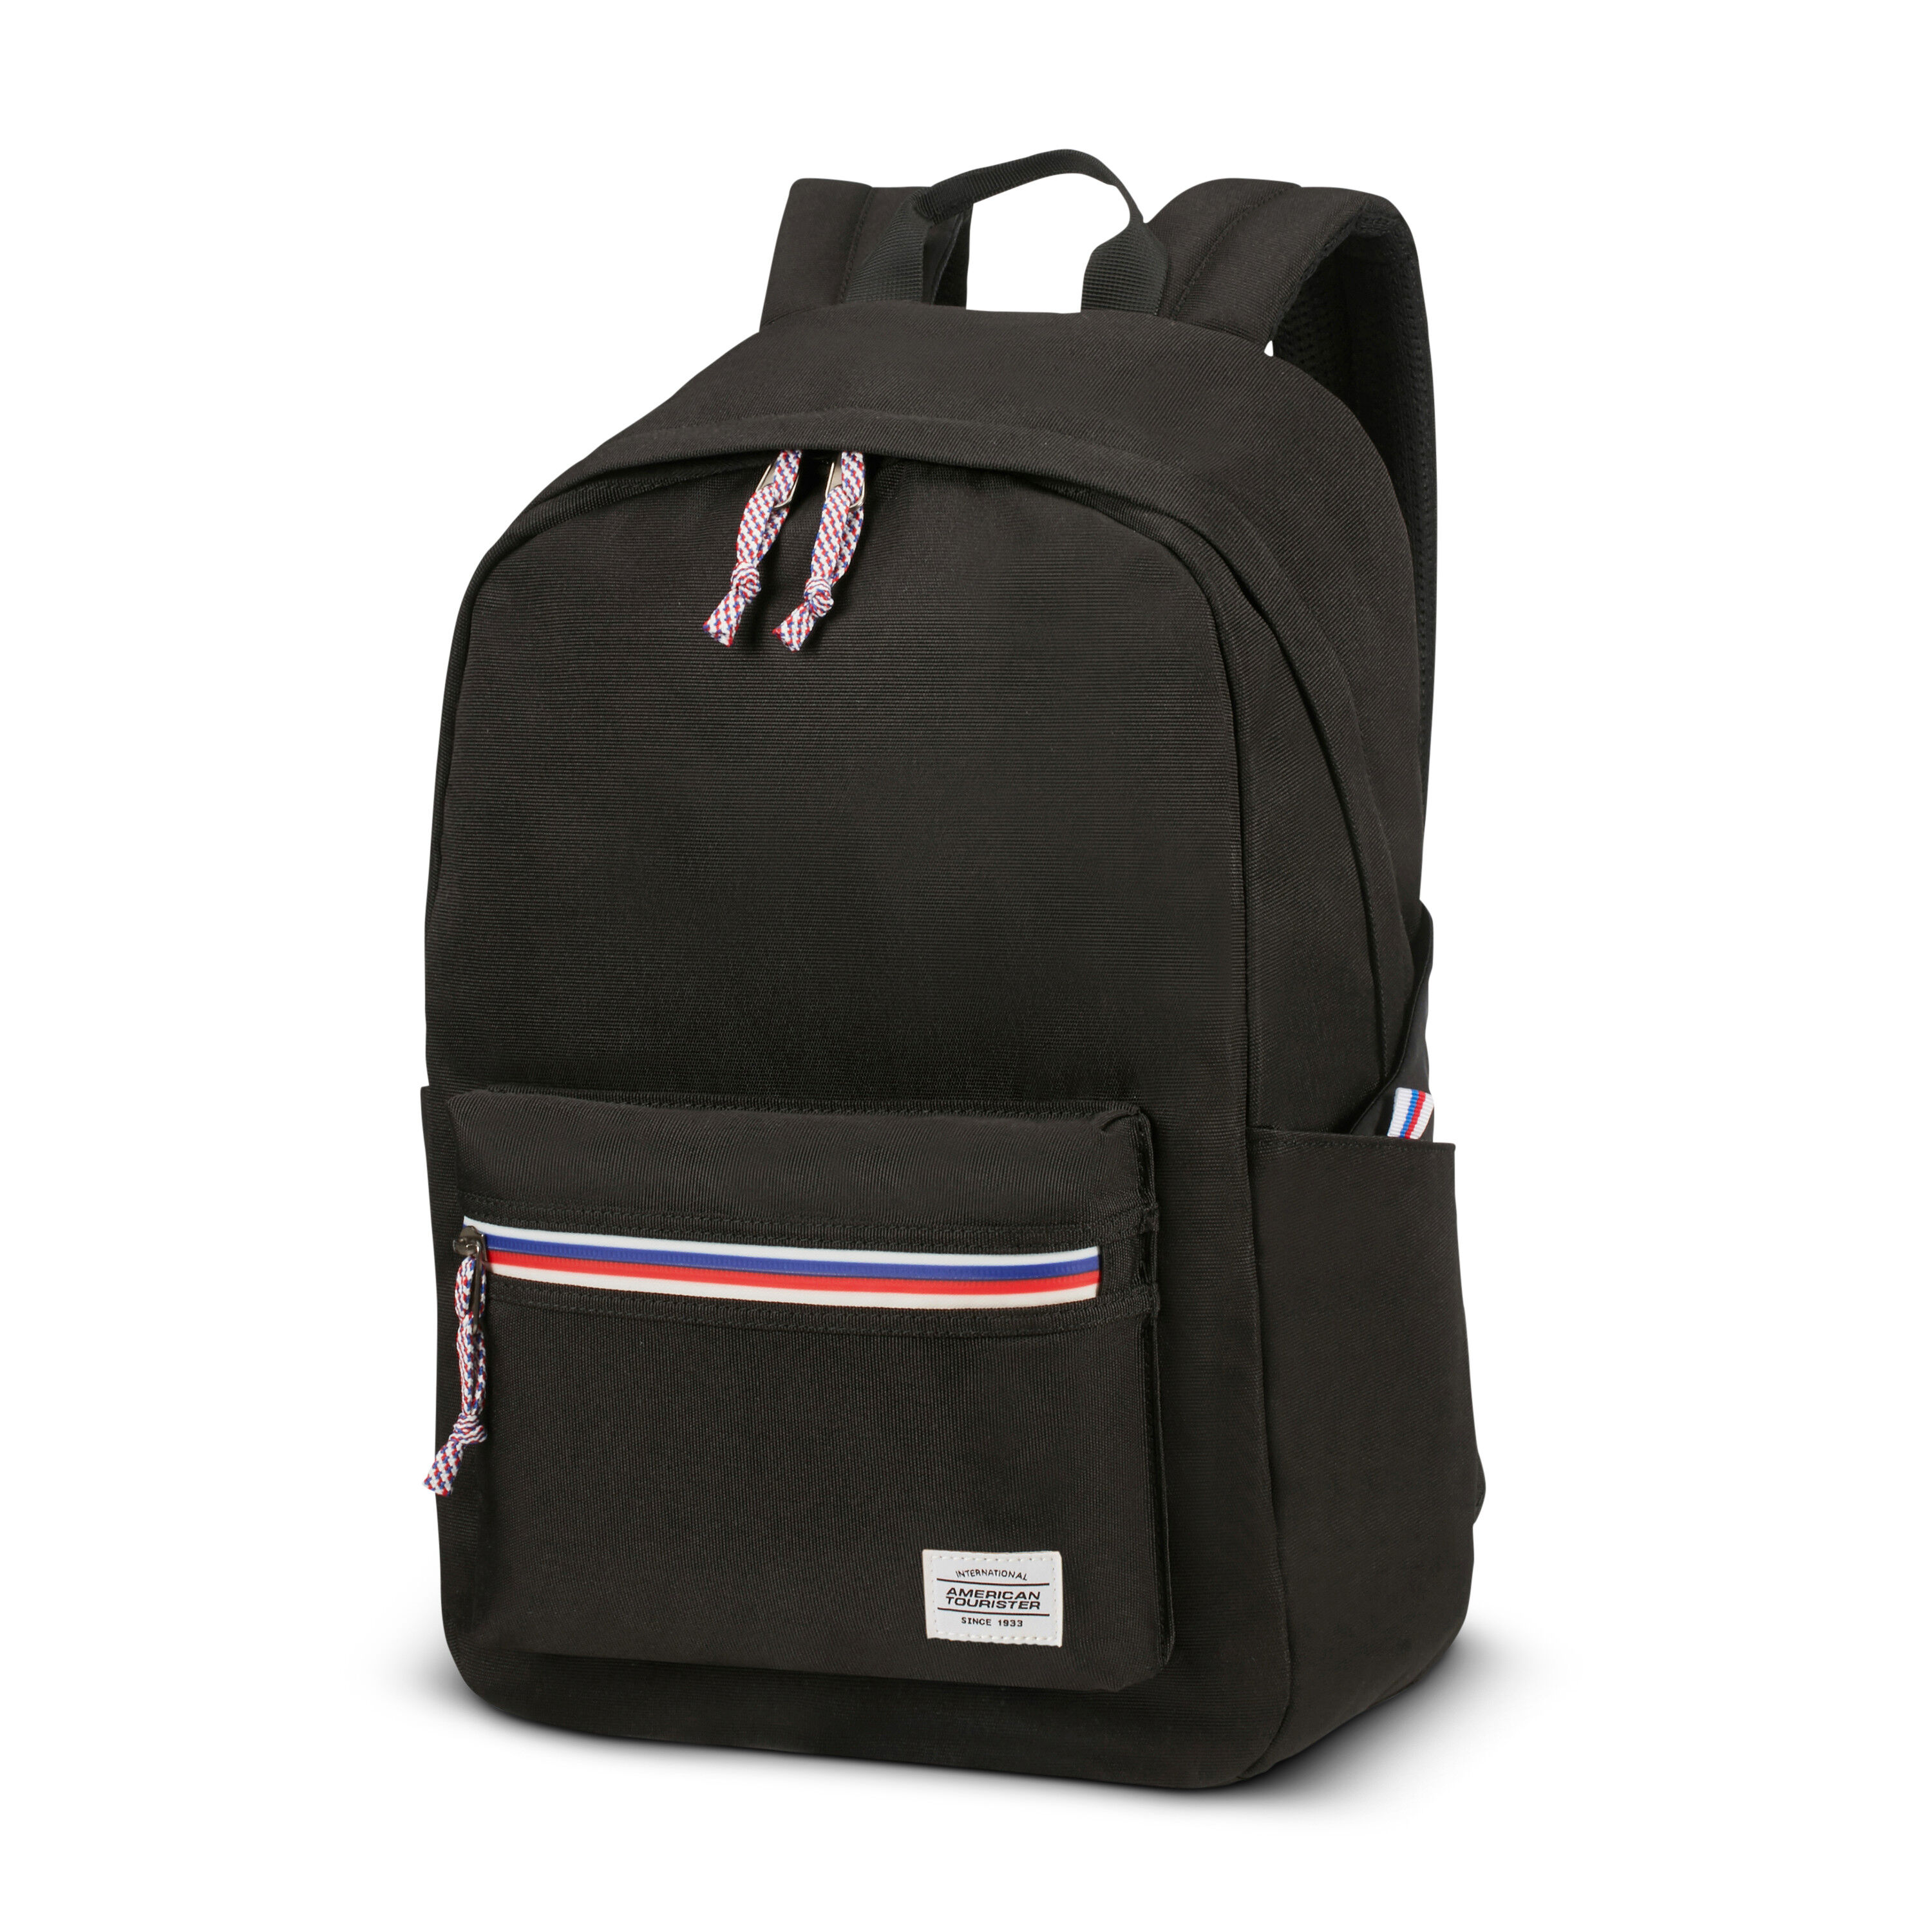 AMERICAN TOURISTER Zumba Puls 01 30 L Backpack Navy - Price in India |  Flipkart.com